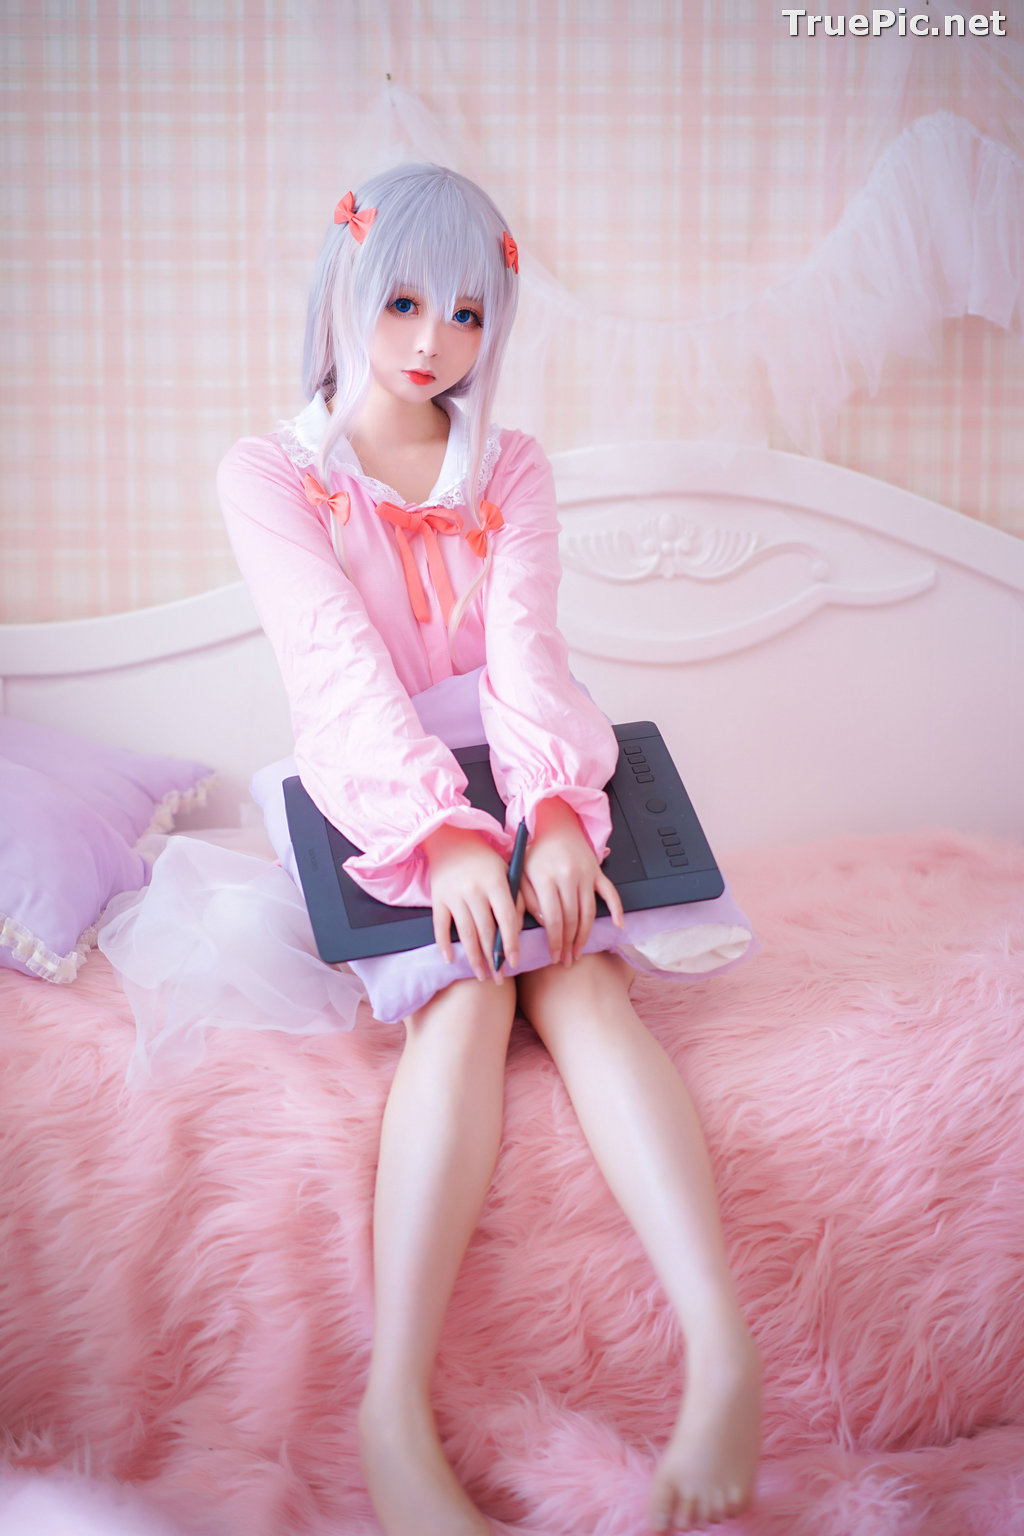 Image [MTCos] 喵糖映画 Vol.048 - Chinese Cute Model - Lovely Pink - TruePic.net - Picture-12